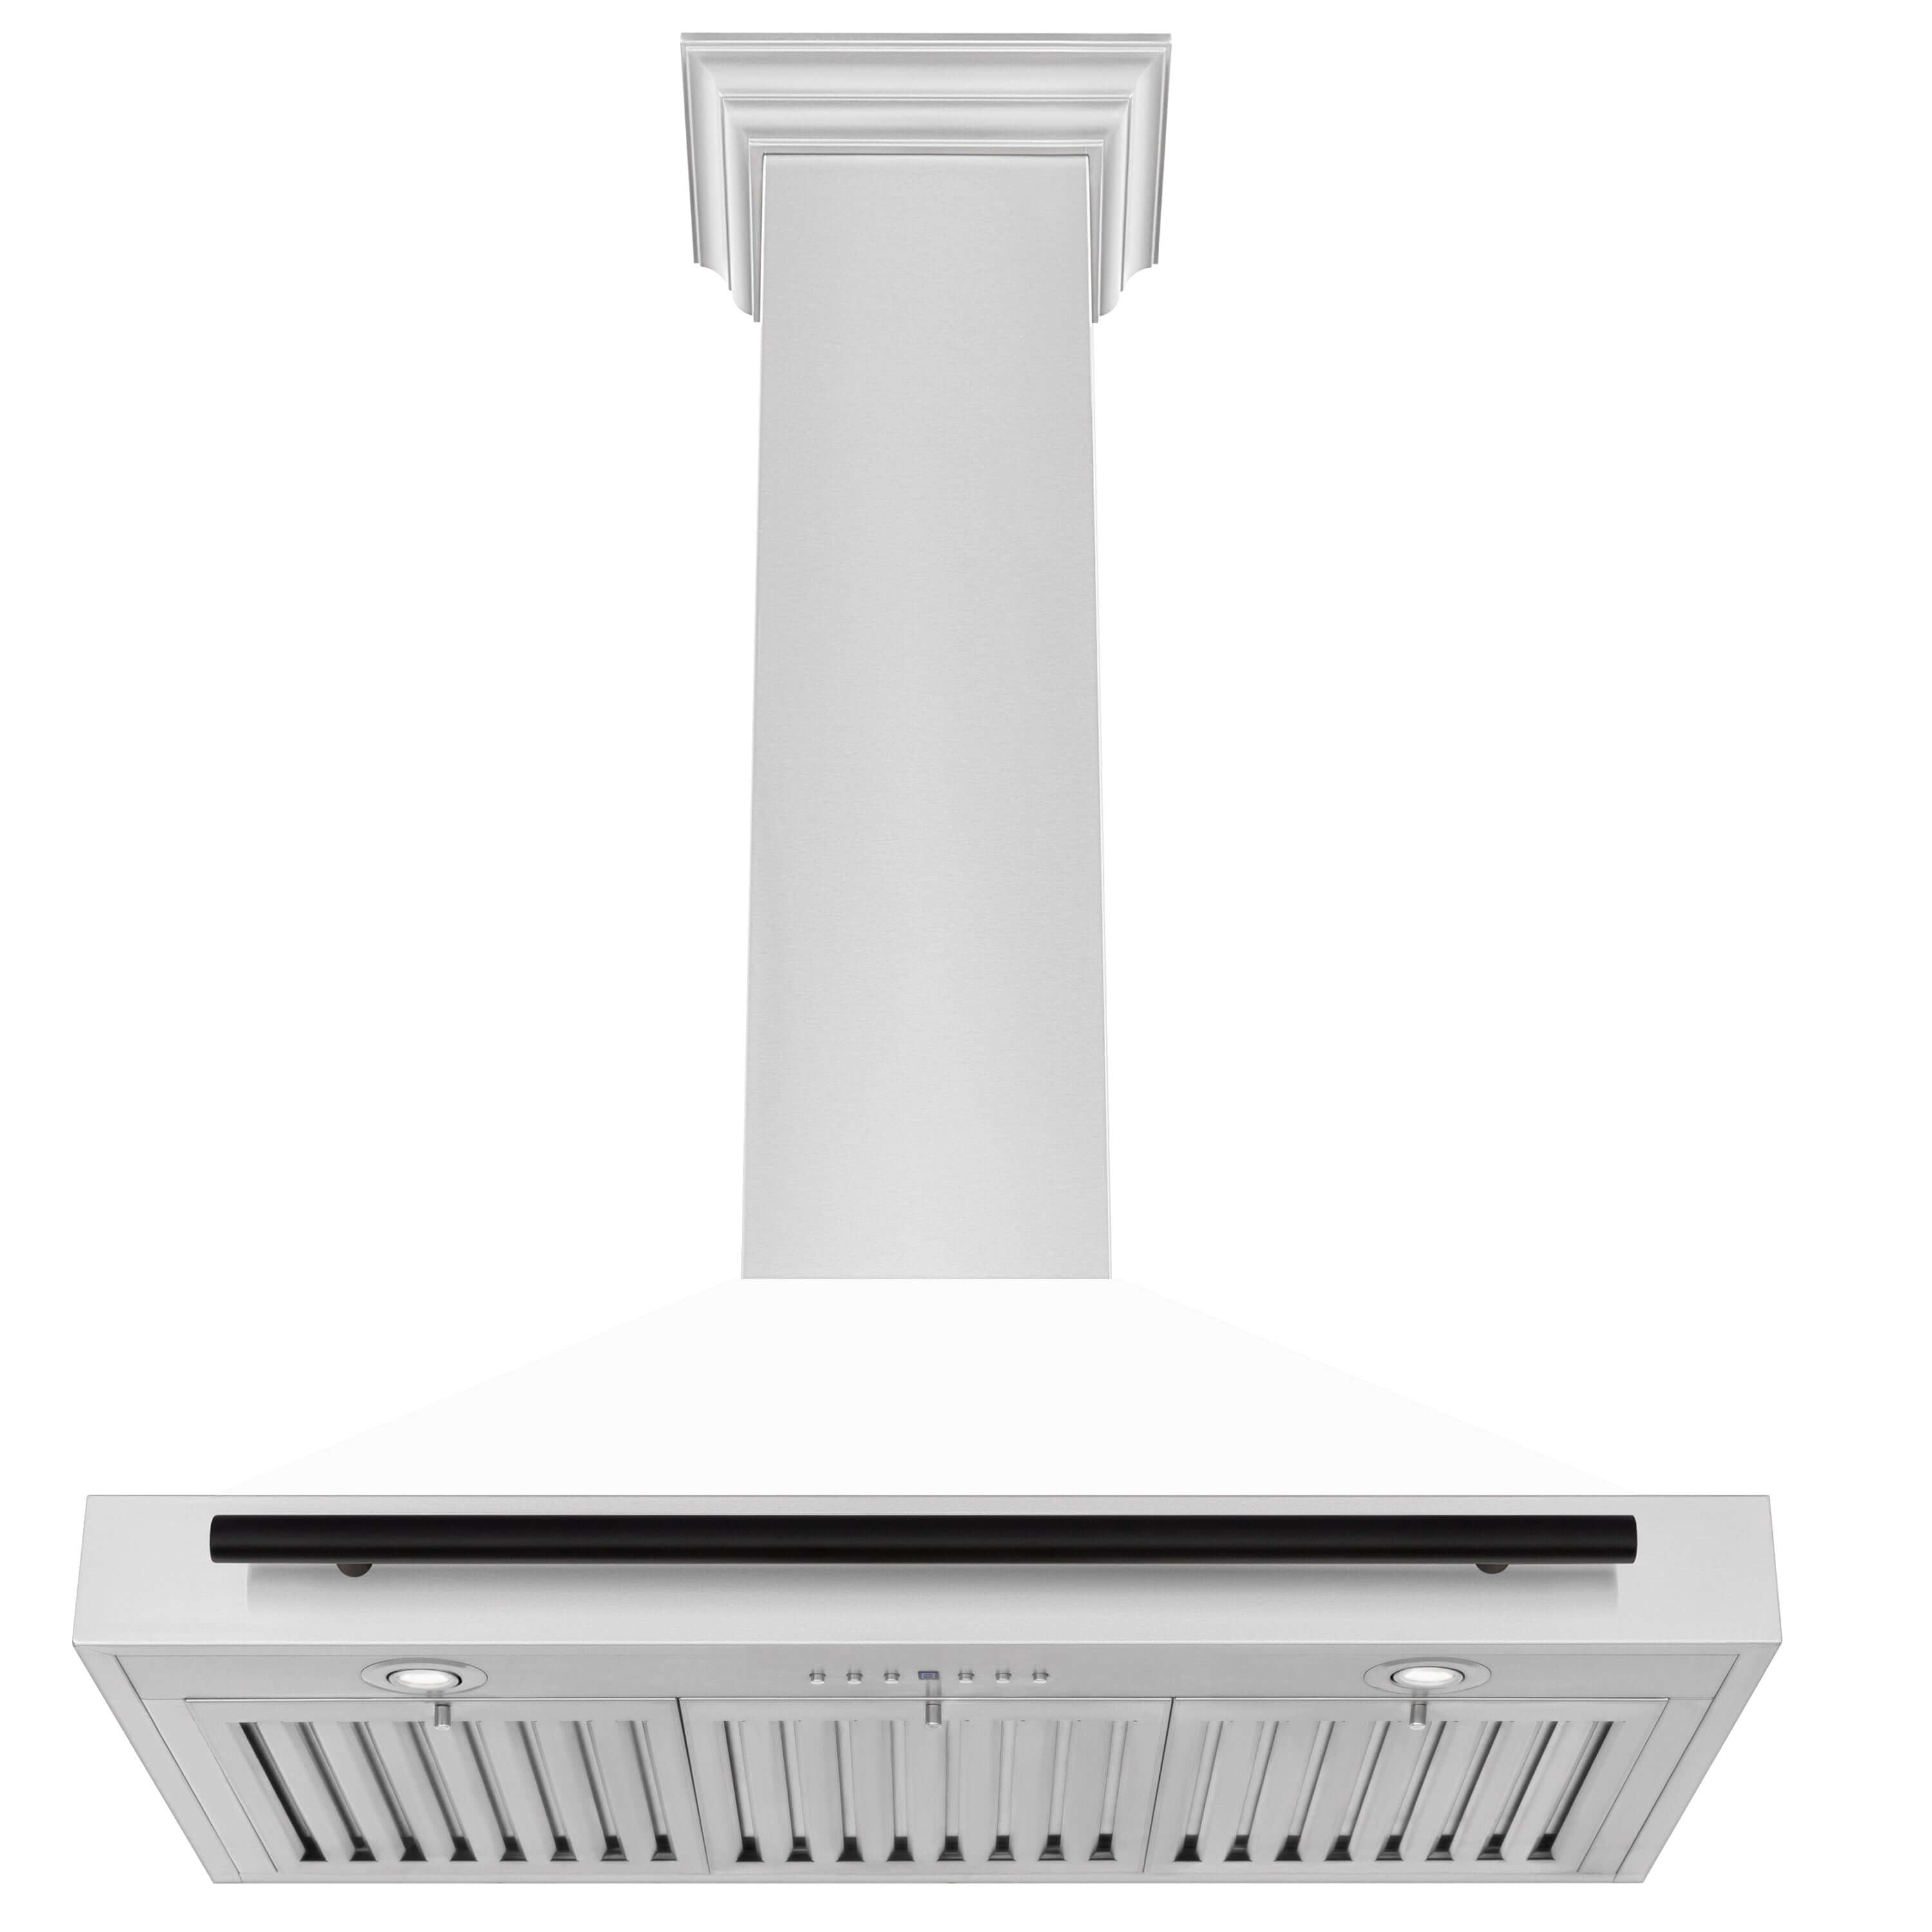 ZLINE Autograph Edition 36 in. Stainless Steel Range Hood with White Matte Shell and Accents (KB4STZ-WM36) front, under.